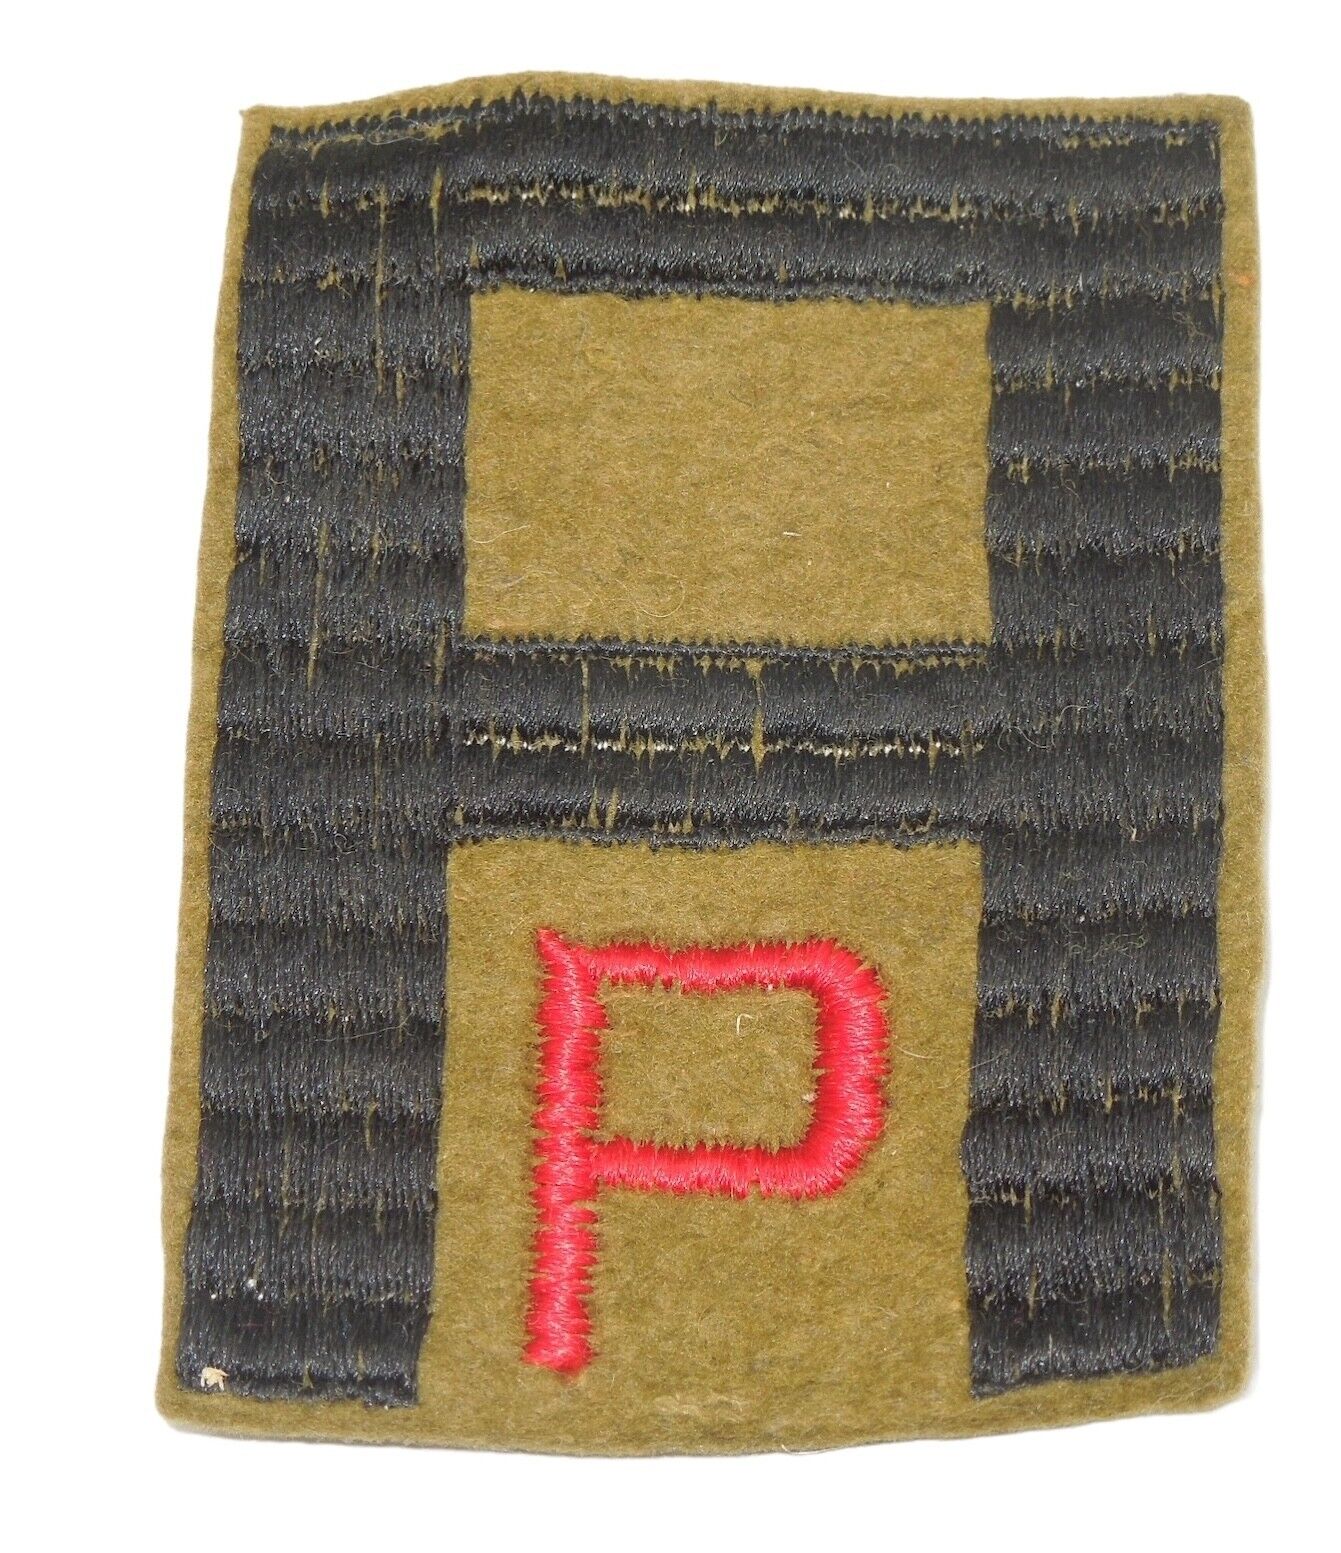 RARE Original WWI US 1st First Army PIONEER Patch S6